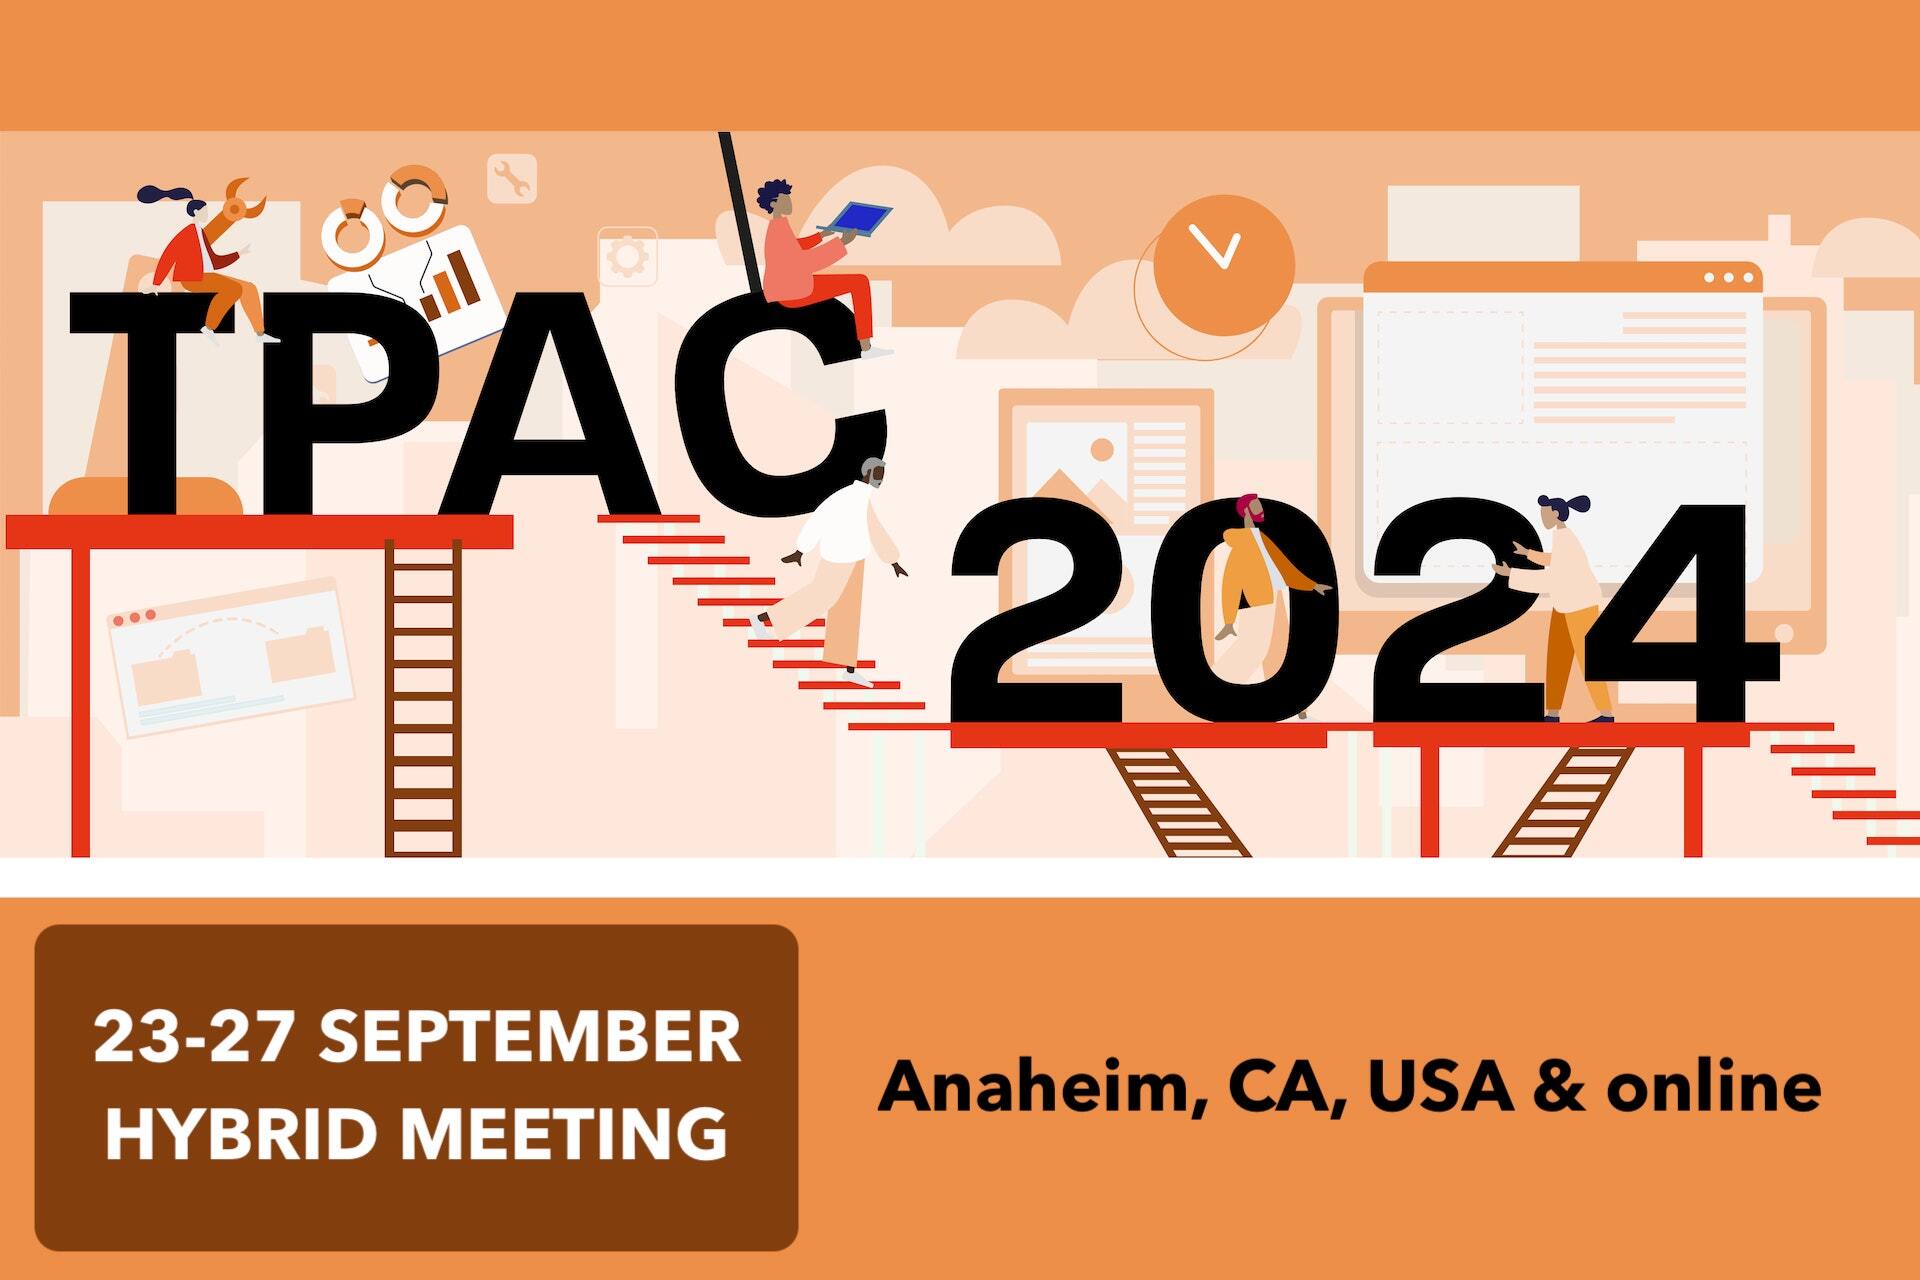 TPAC 2024 illustration with text: 23-27 September in Anaheim, California, USA and online